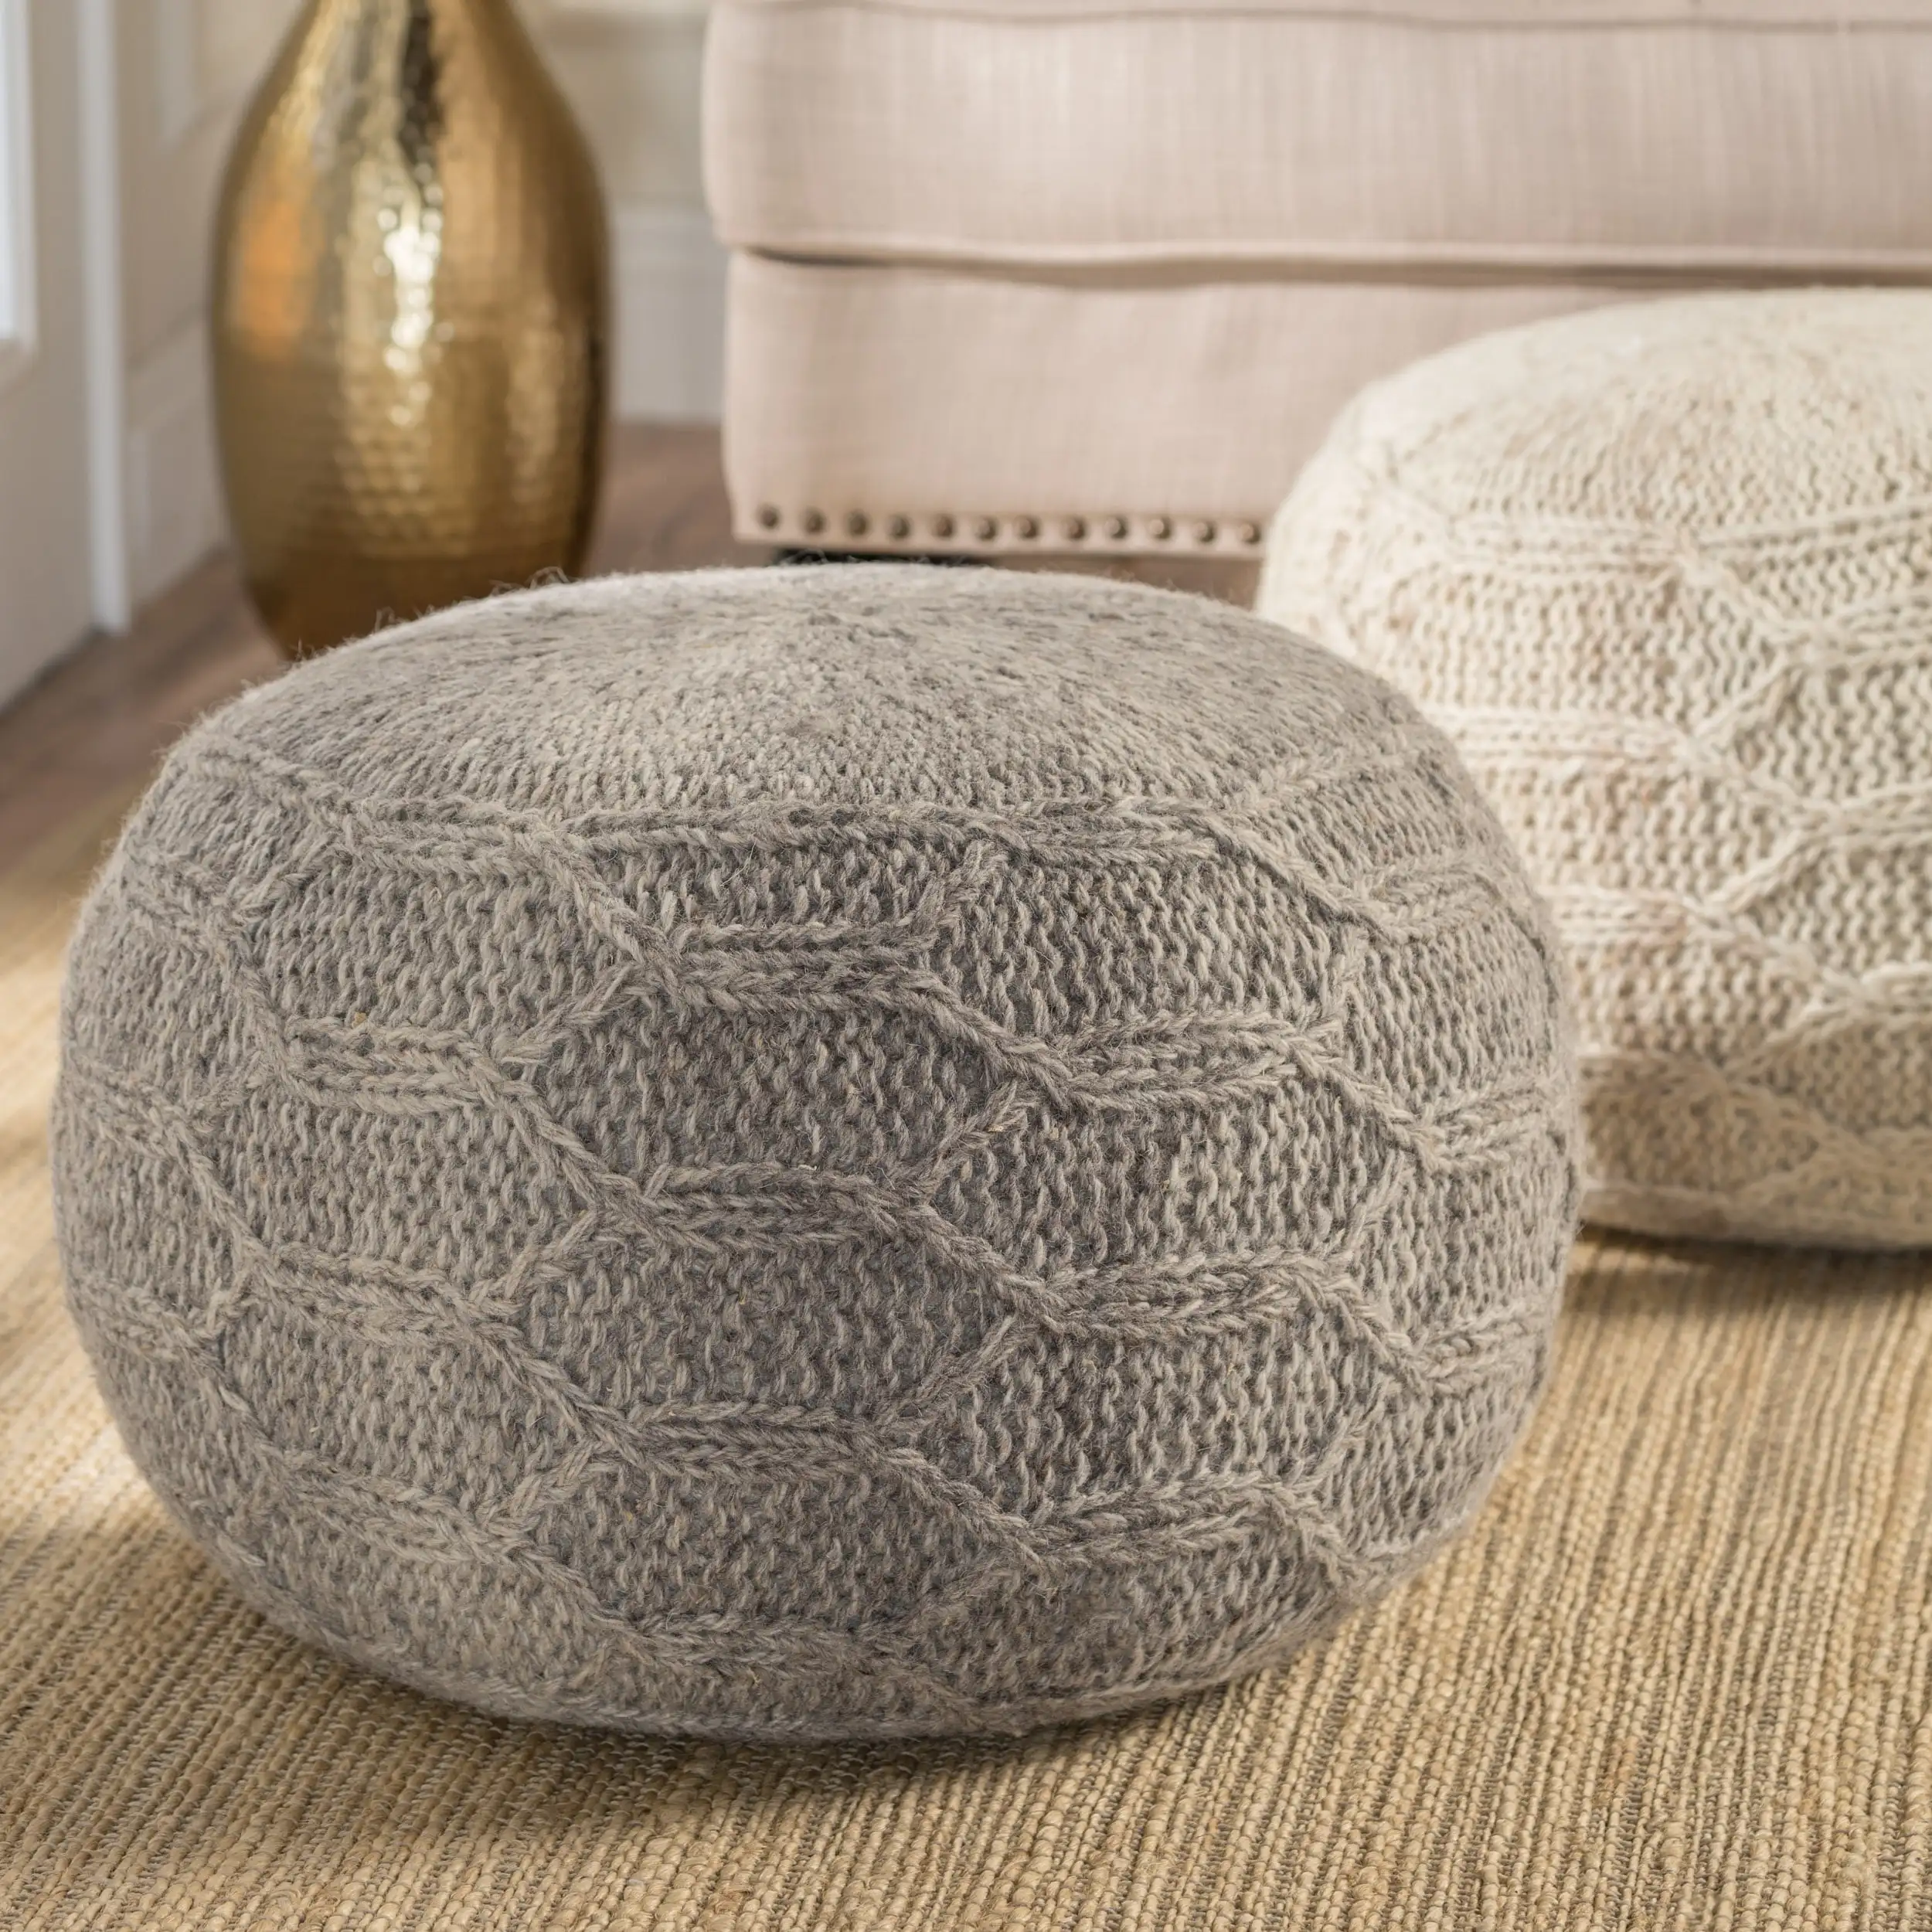 

Noble House Durable low-profil luxurious colorfast easy to clean Handcrafted Boho Fabric Pouf, Gray